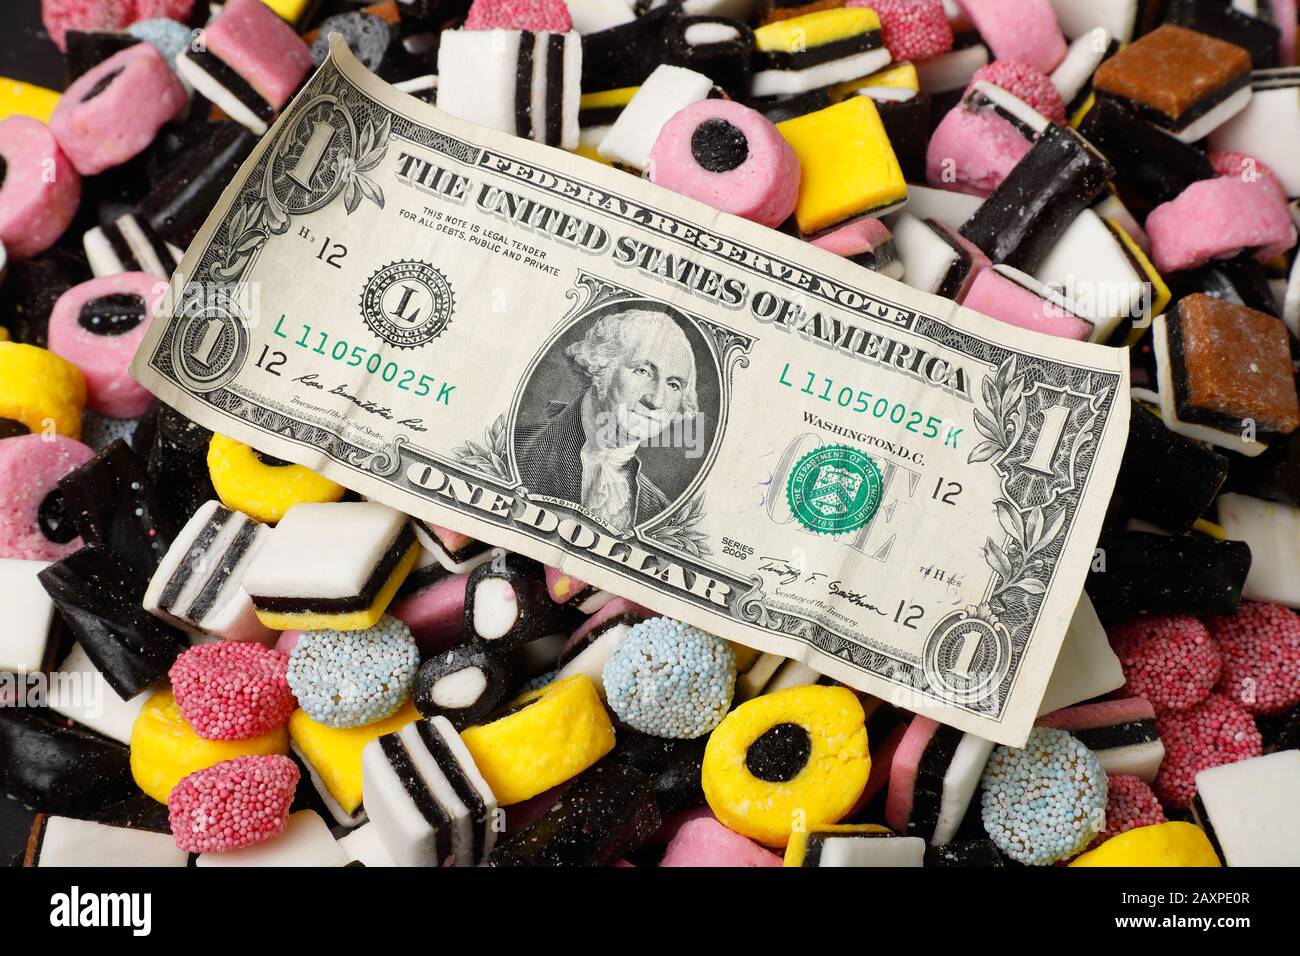 One US dollar banknote on top of assorted English liquorice candy. Stock Photo